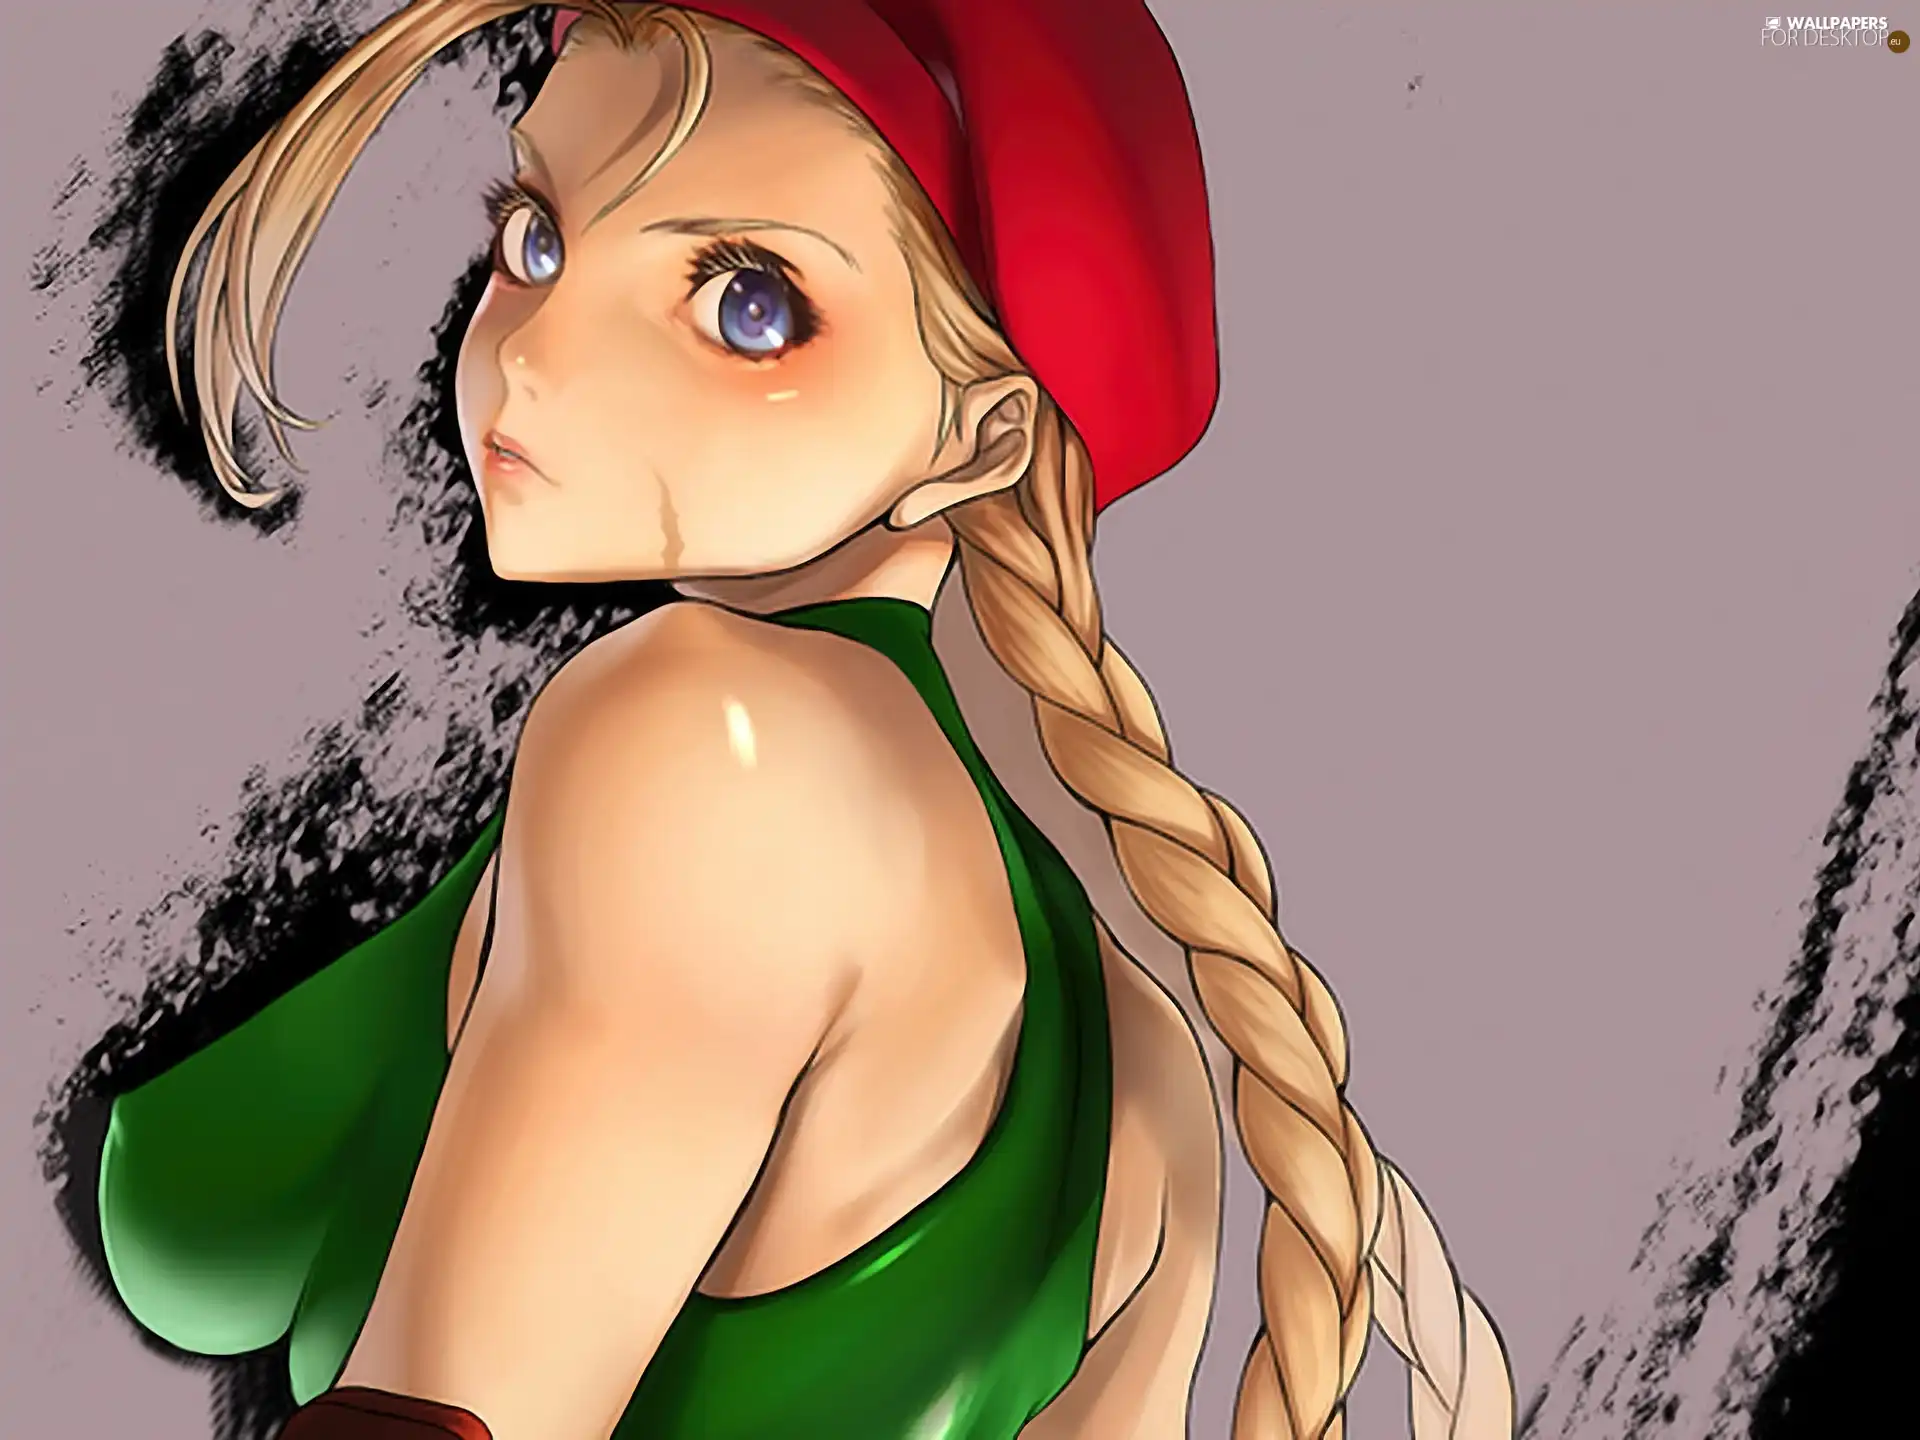 ##, Women, beret, costume, pigtail, Cammy